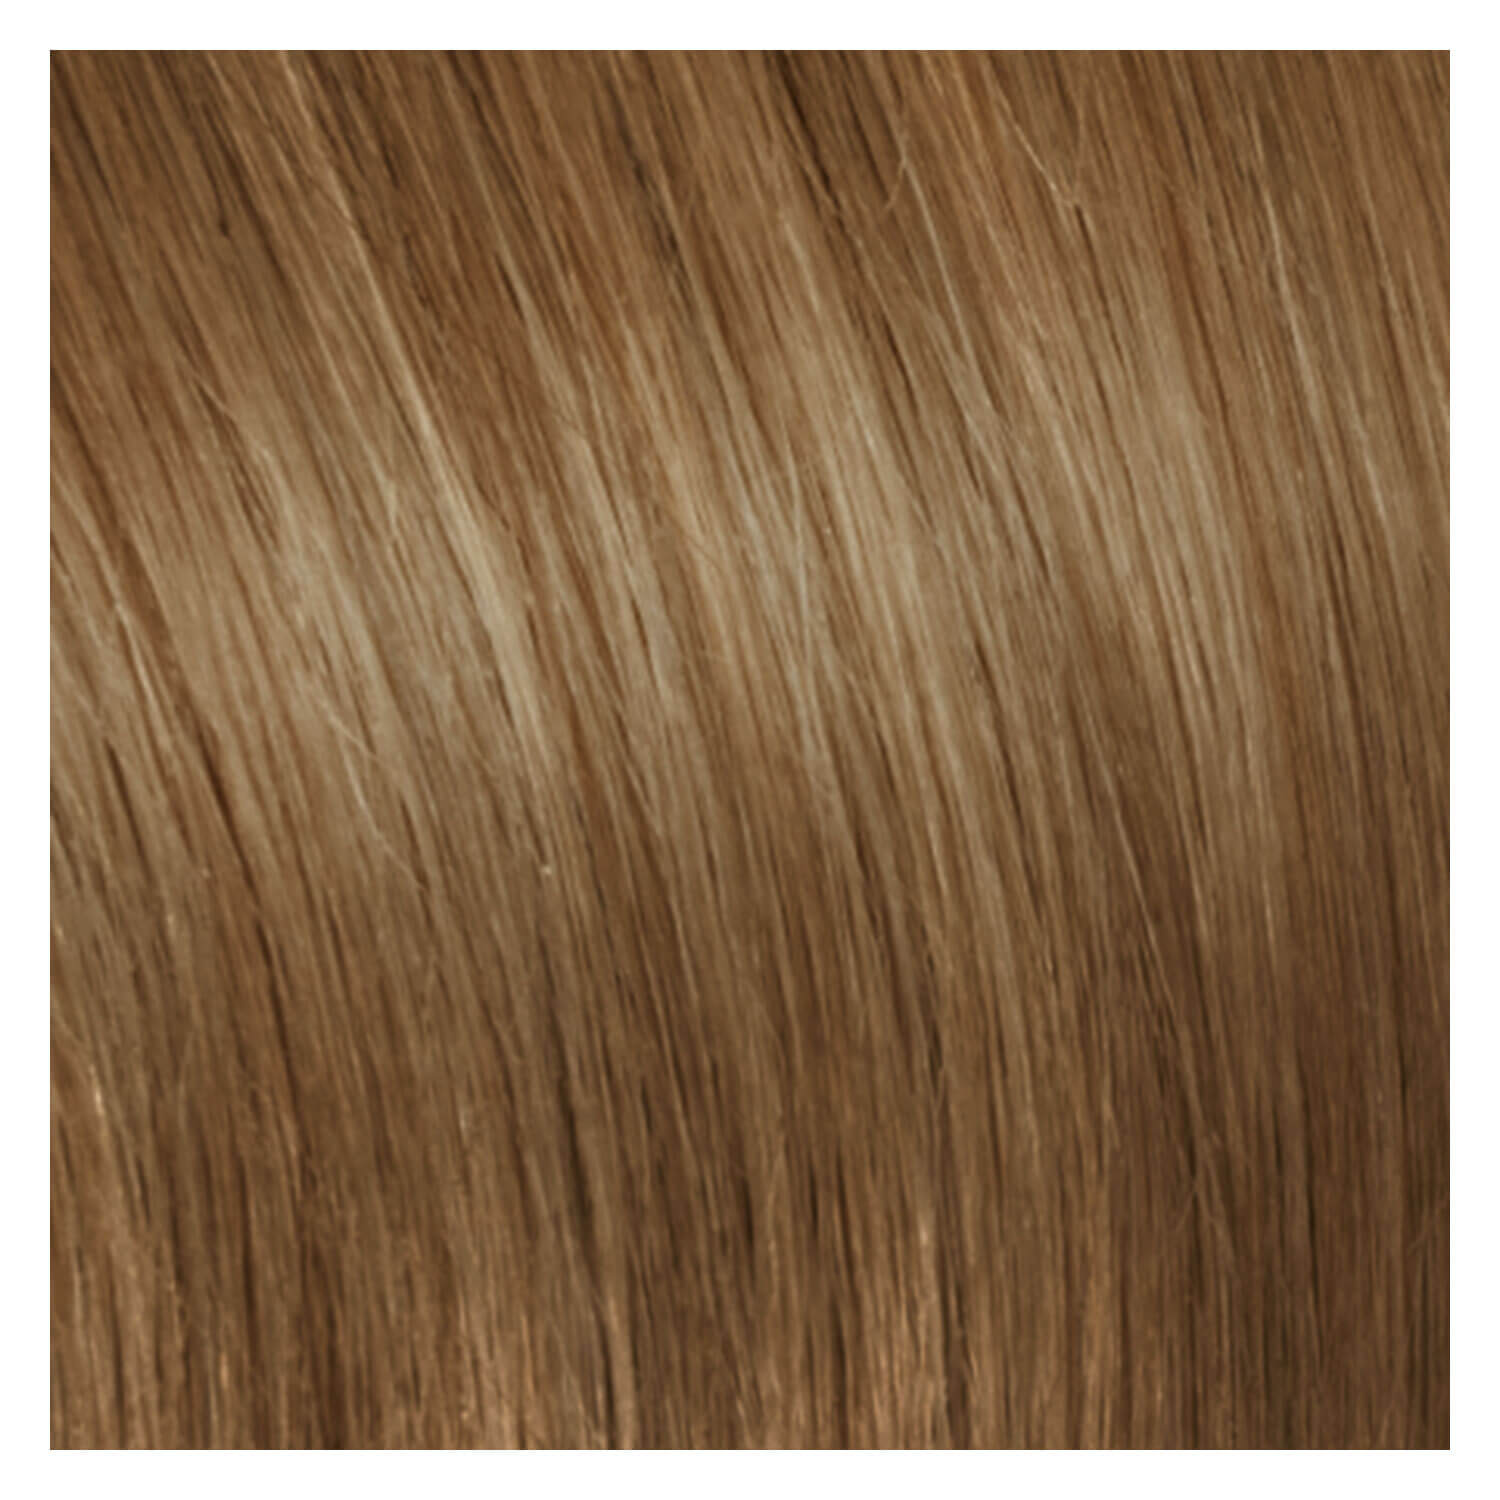 SHE Extensions SHE Tape In-System Hair Extensions Straight - 14 Natural  Light Blond 40/45cm 